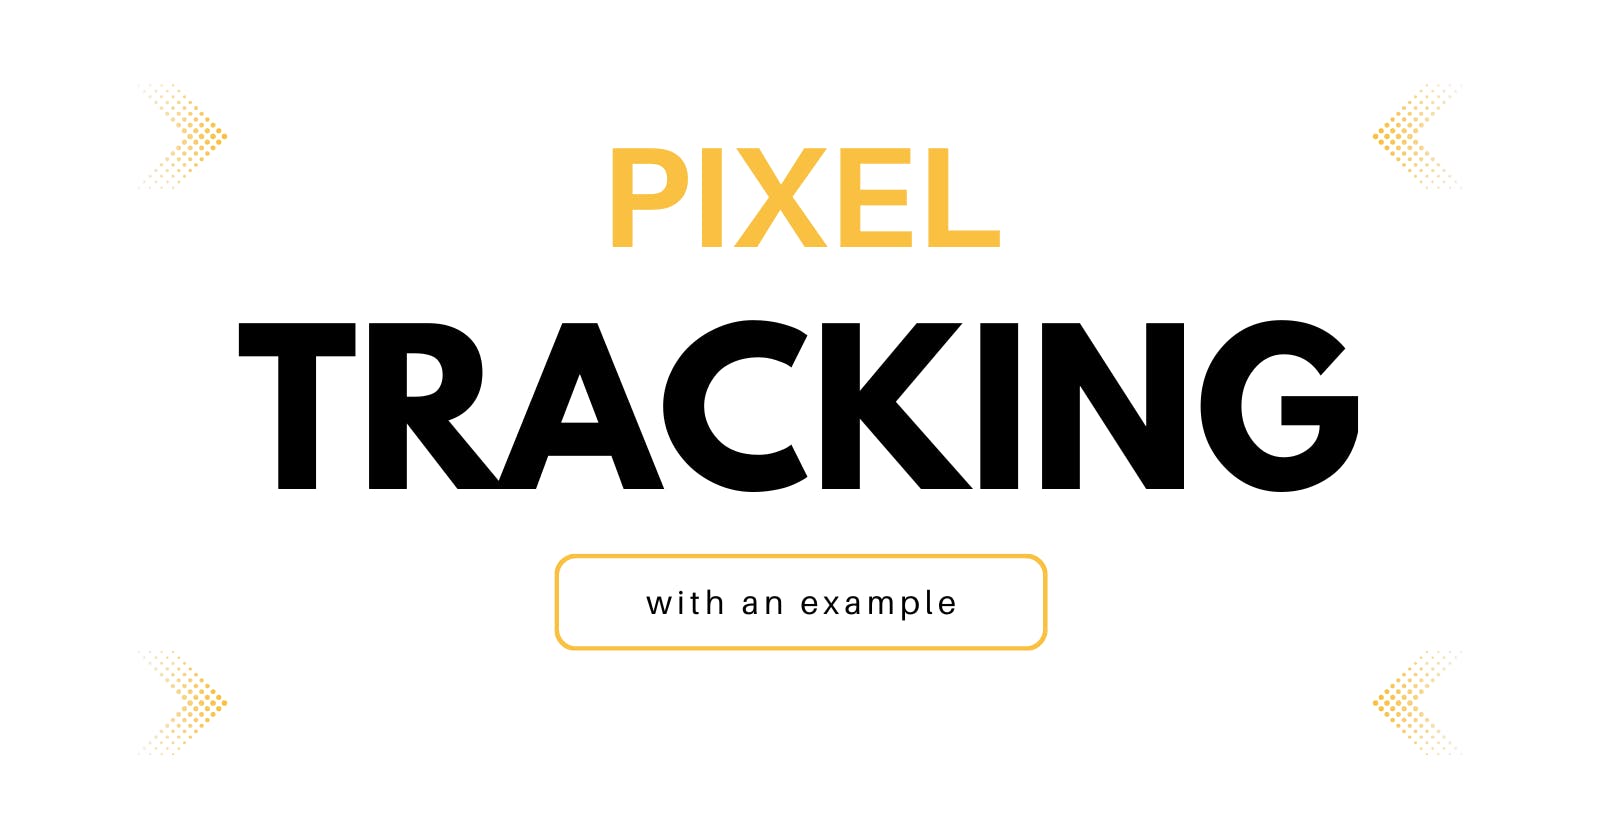 Pixel Tracking, What is it?